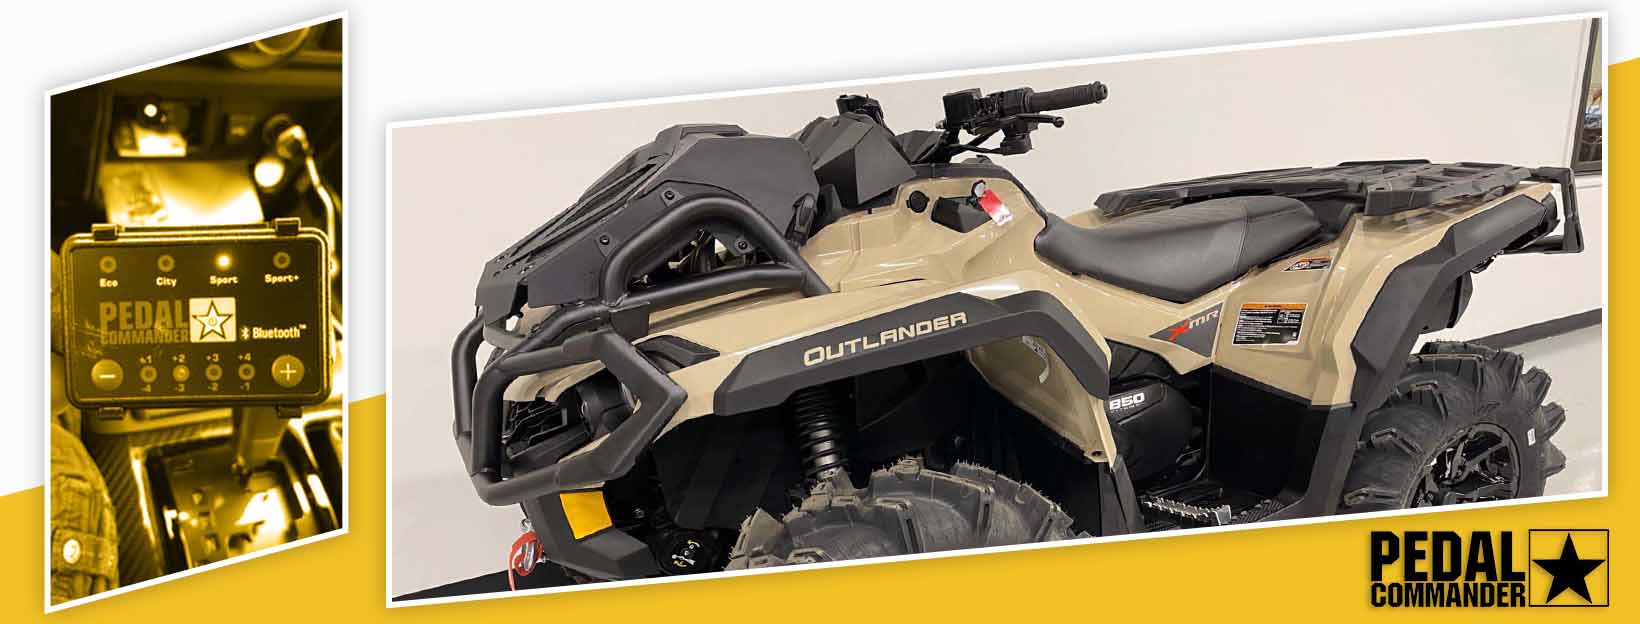 Pedal Commander for Can-Am Outlander - front